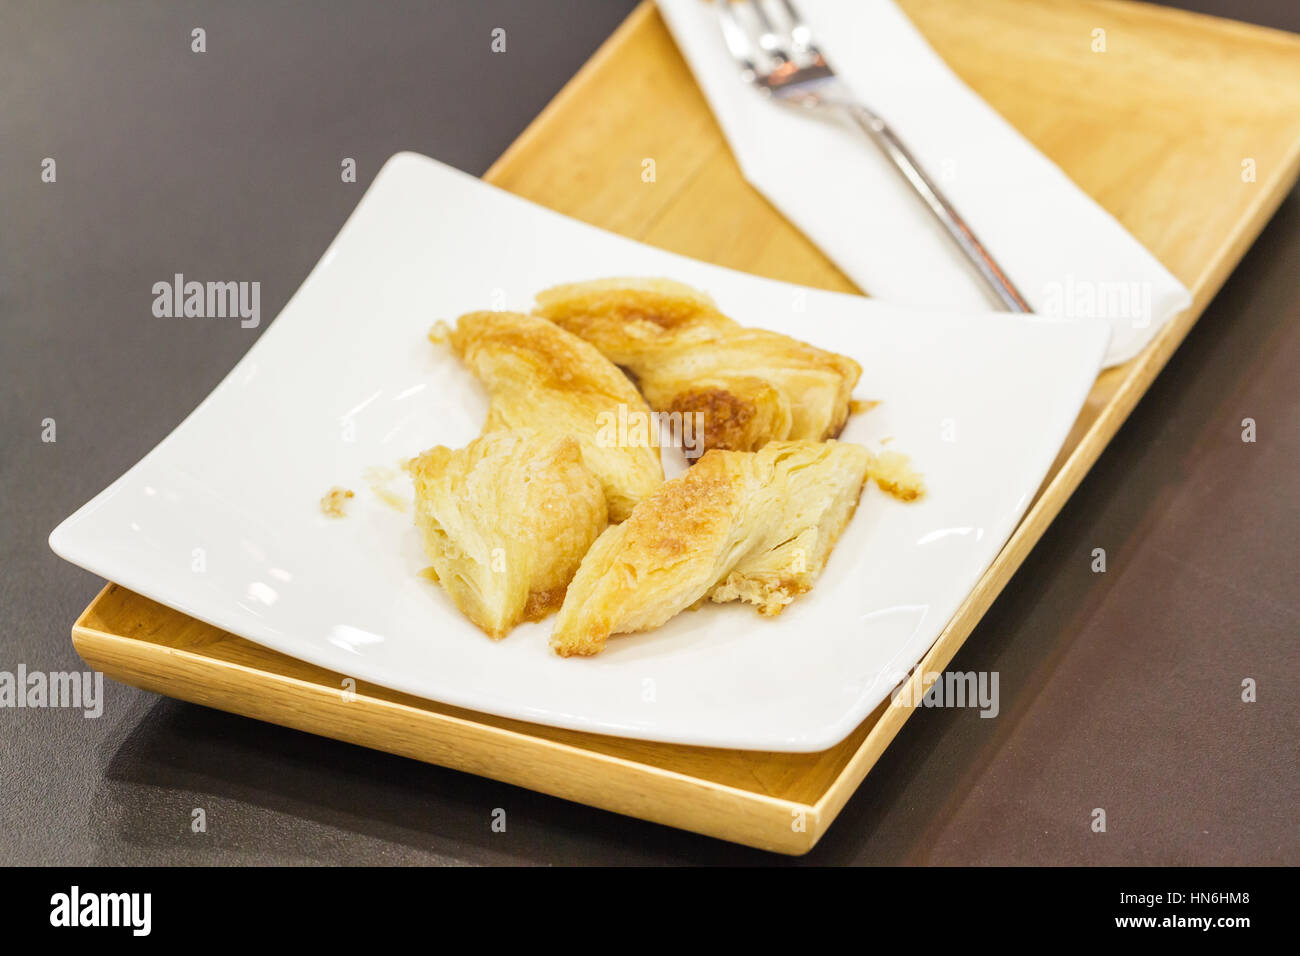 Bread baked cheese slightly salty on wood plate in restaurant. Stock Photo